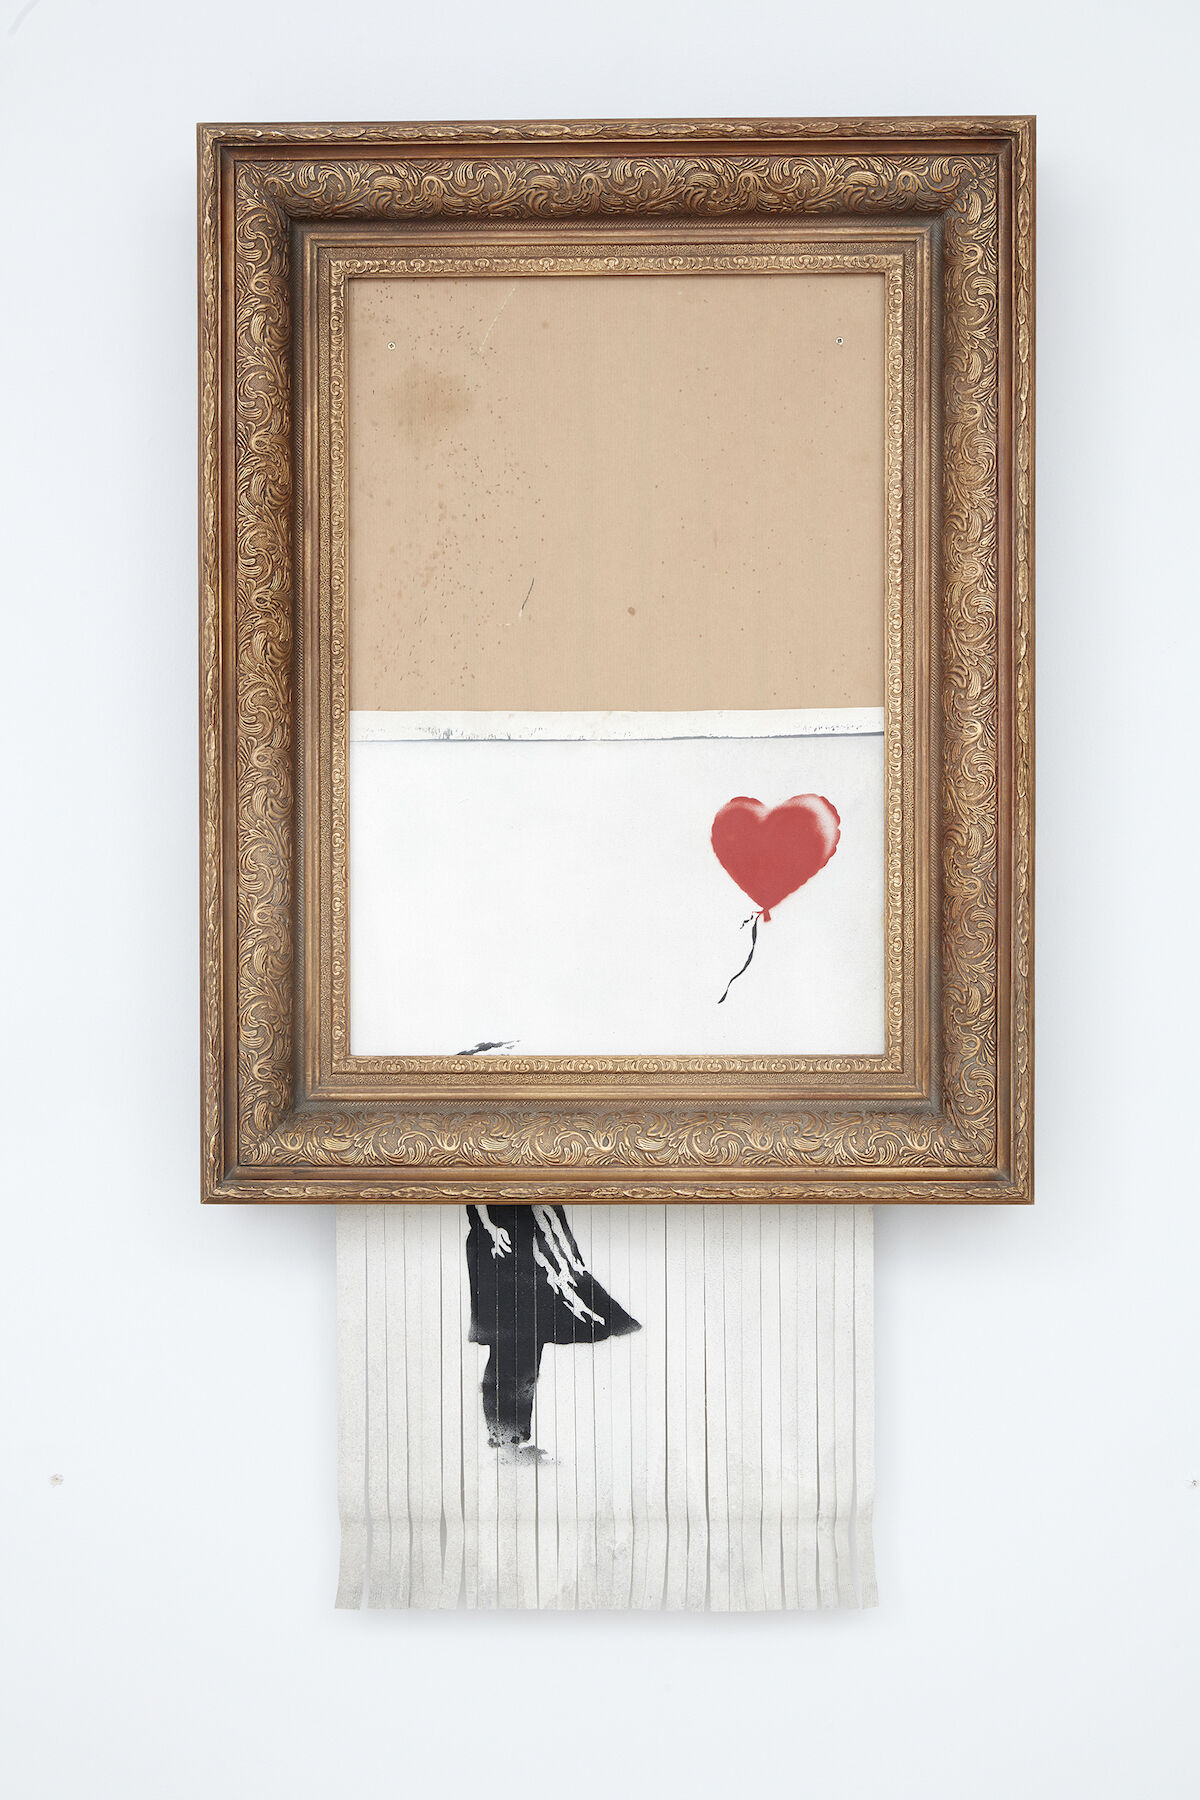 An Artwork By Banksy Shredded Itself After Selling For 1 3 Million At Sotheby S